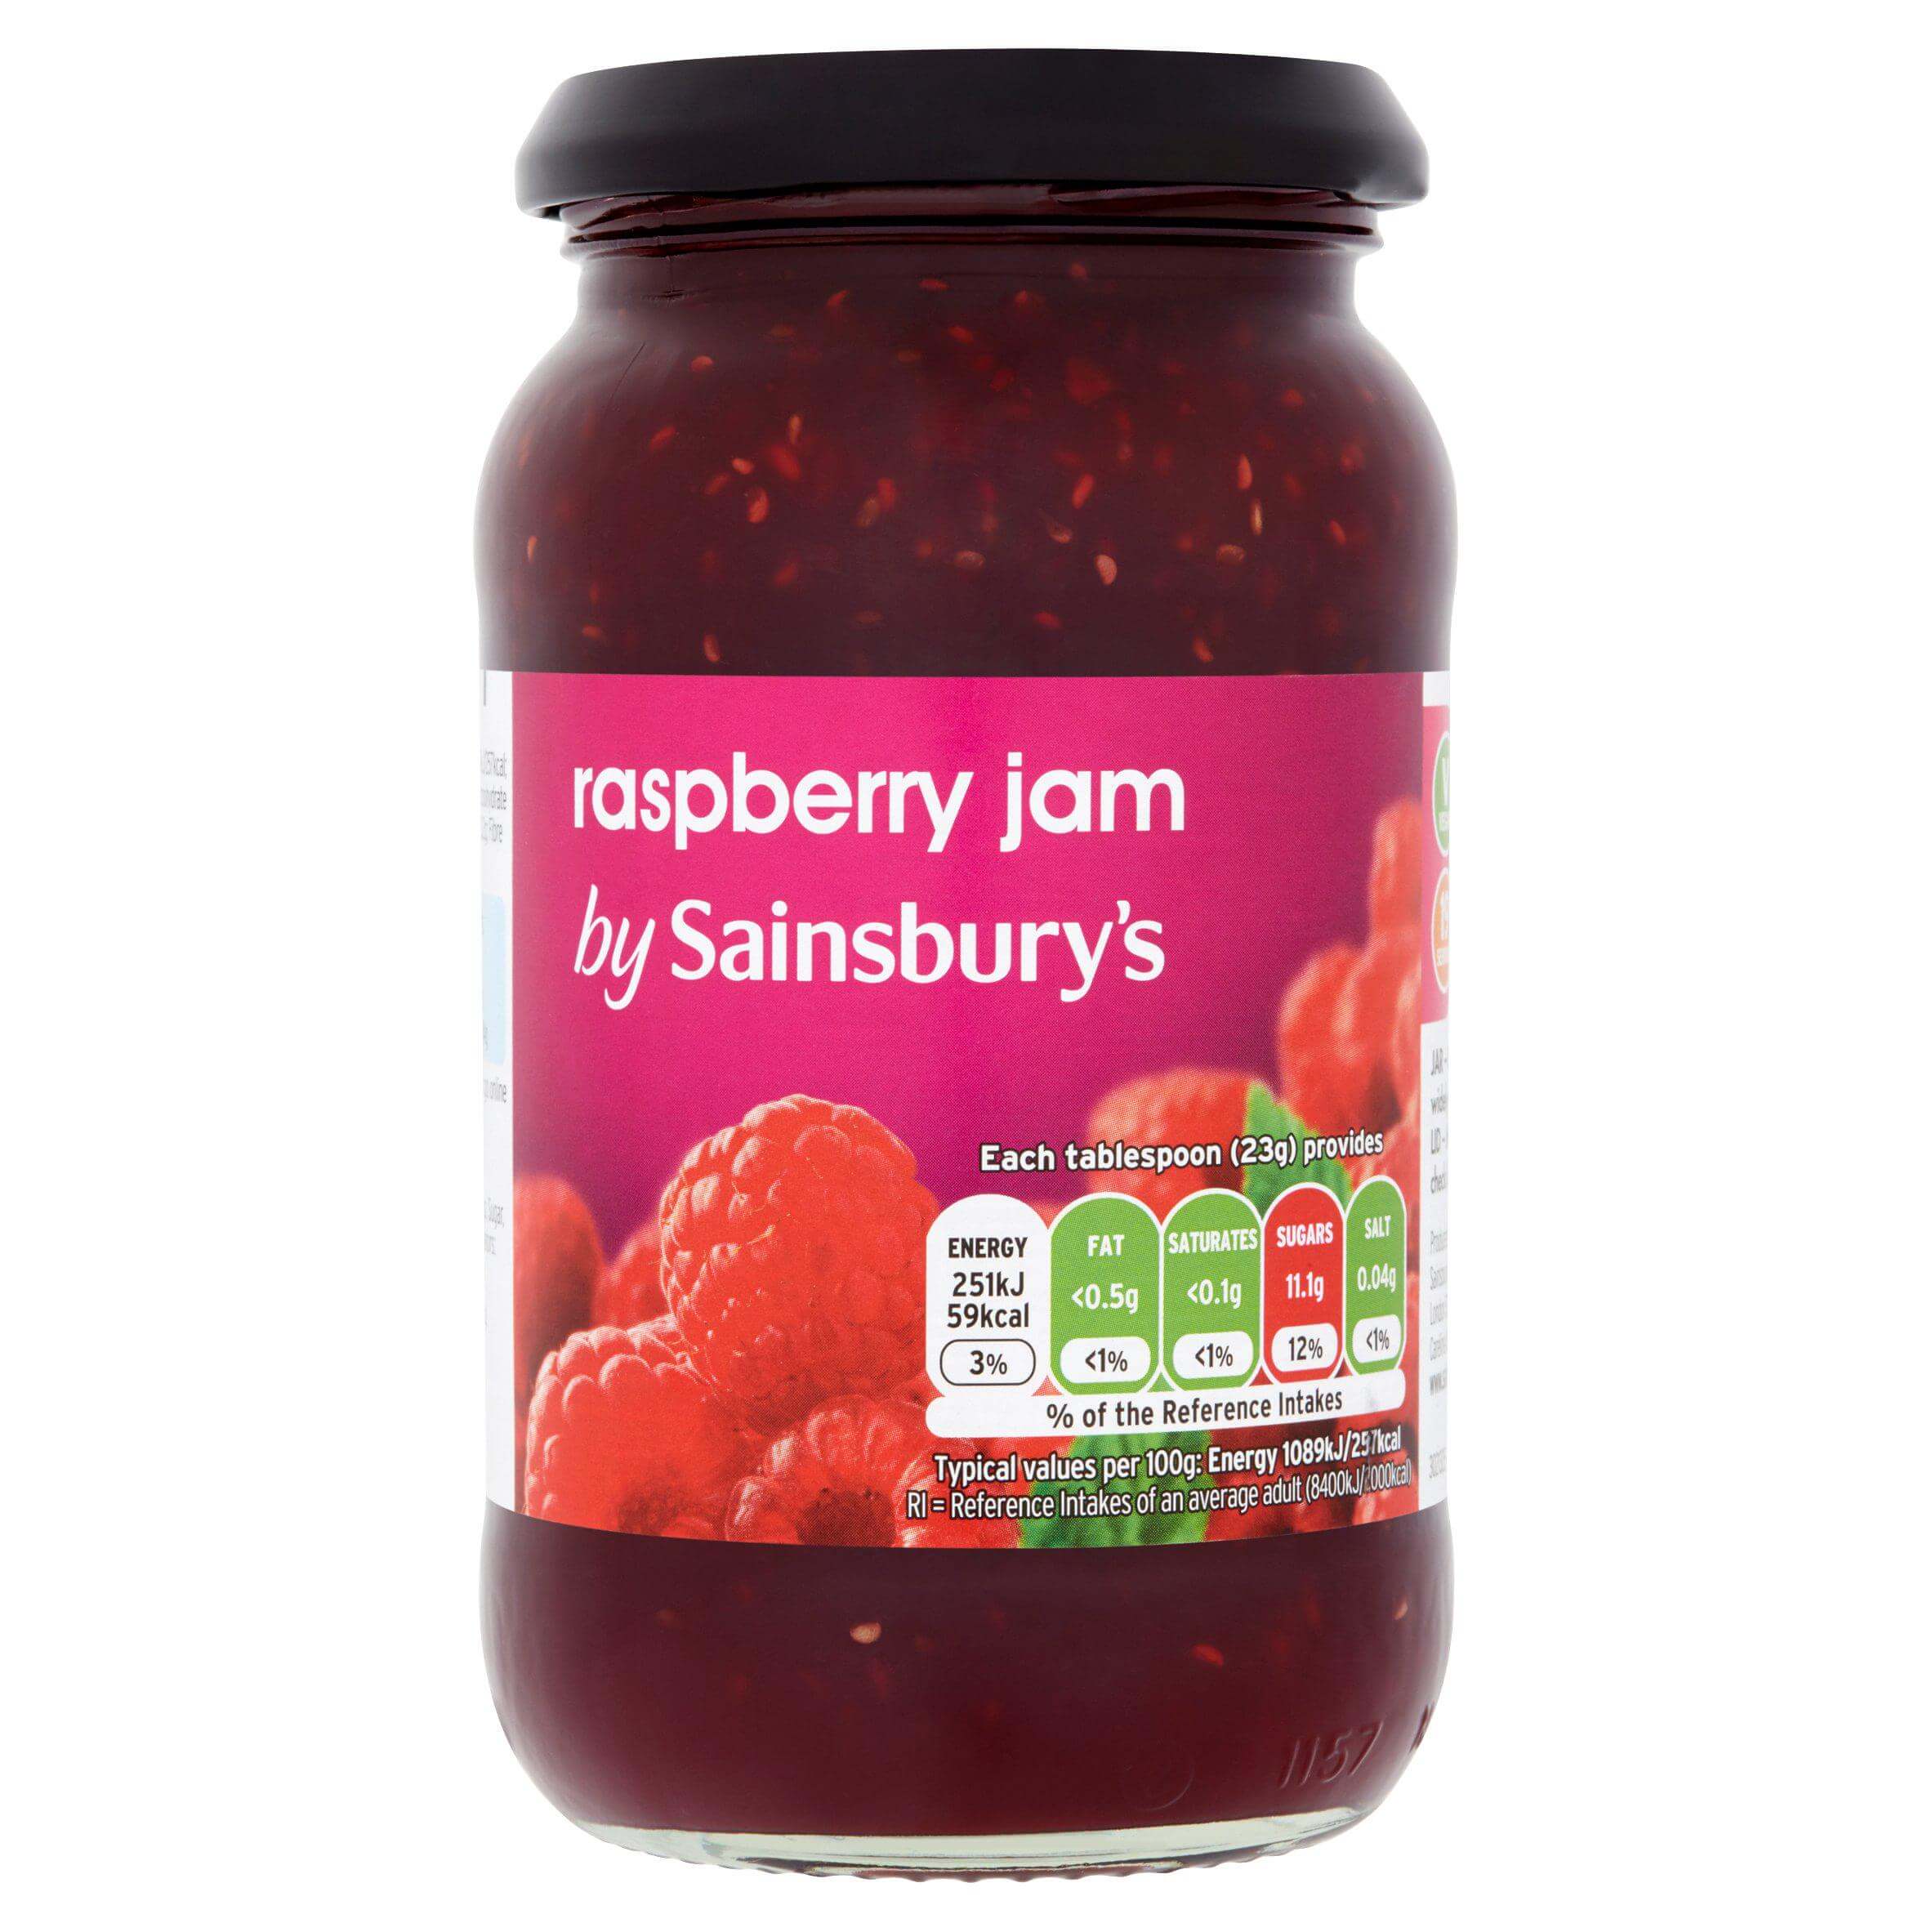 Image of Sainsburys Raspberry Jam made in the UK by Sainsbury's. Buying this product supports a UK business, jobs and the local community